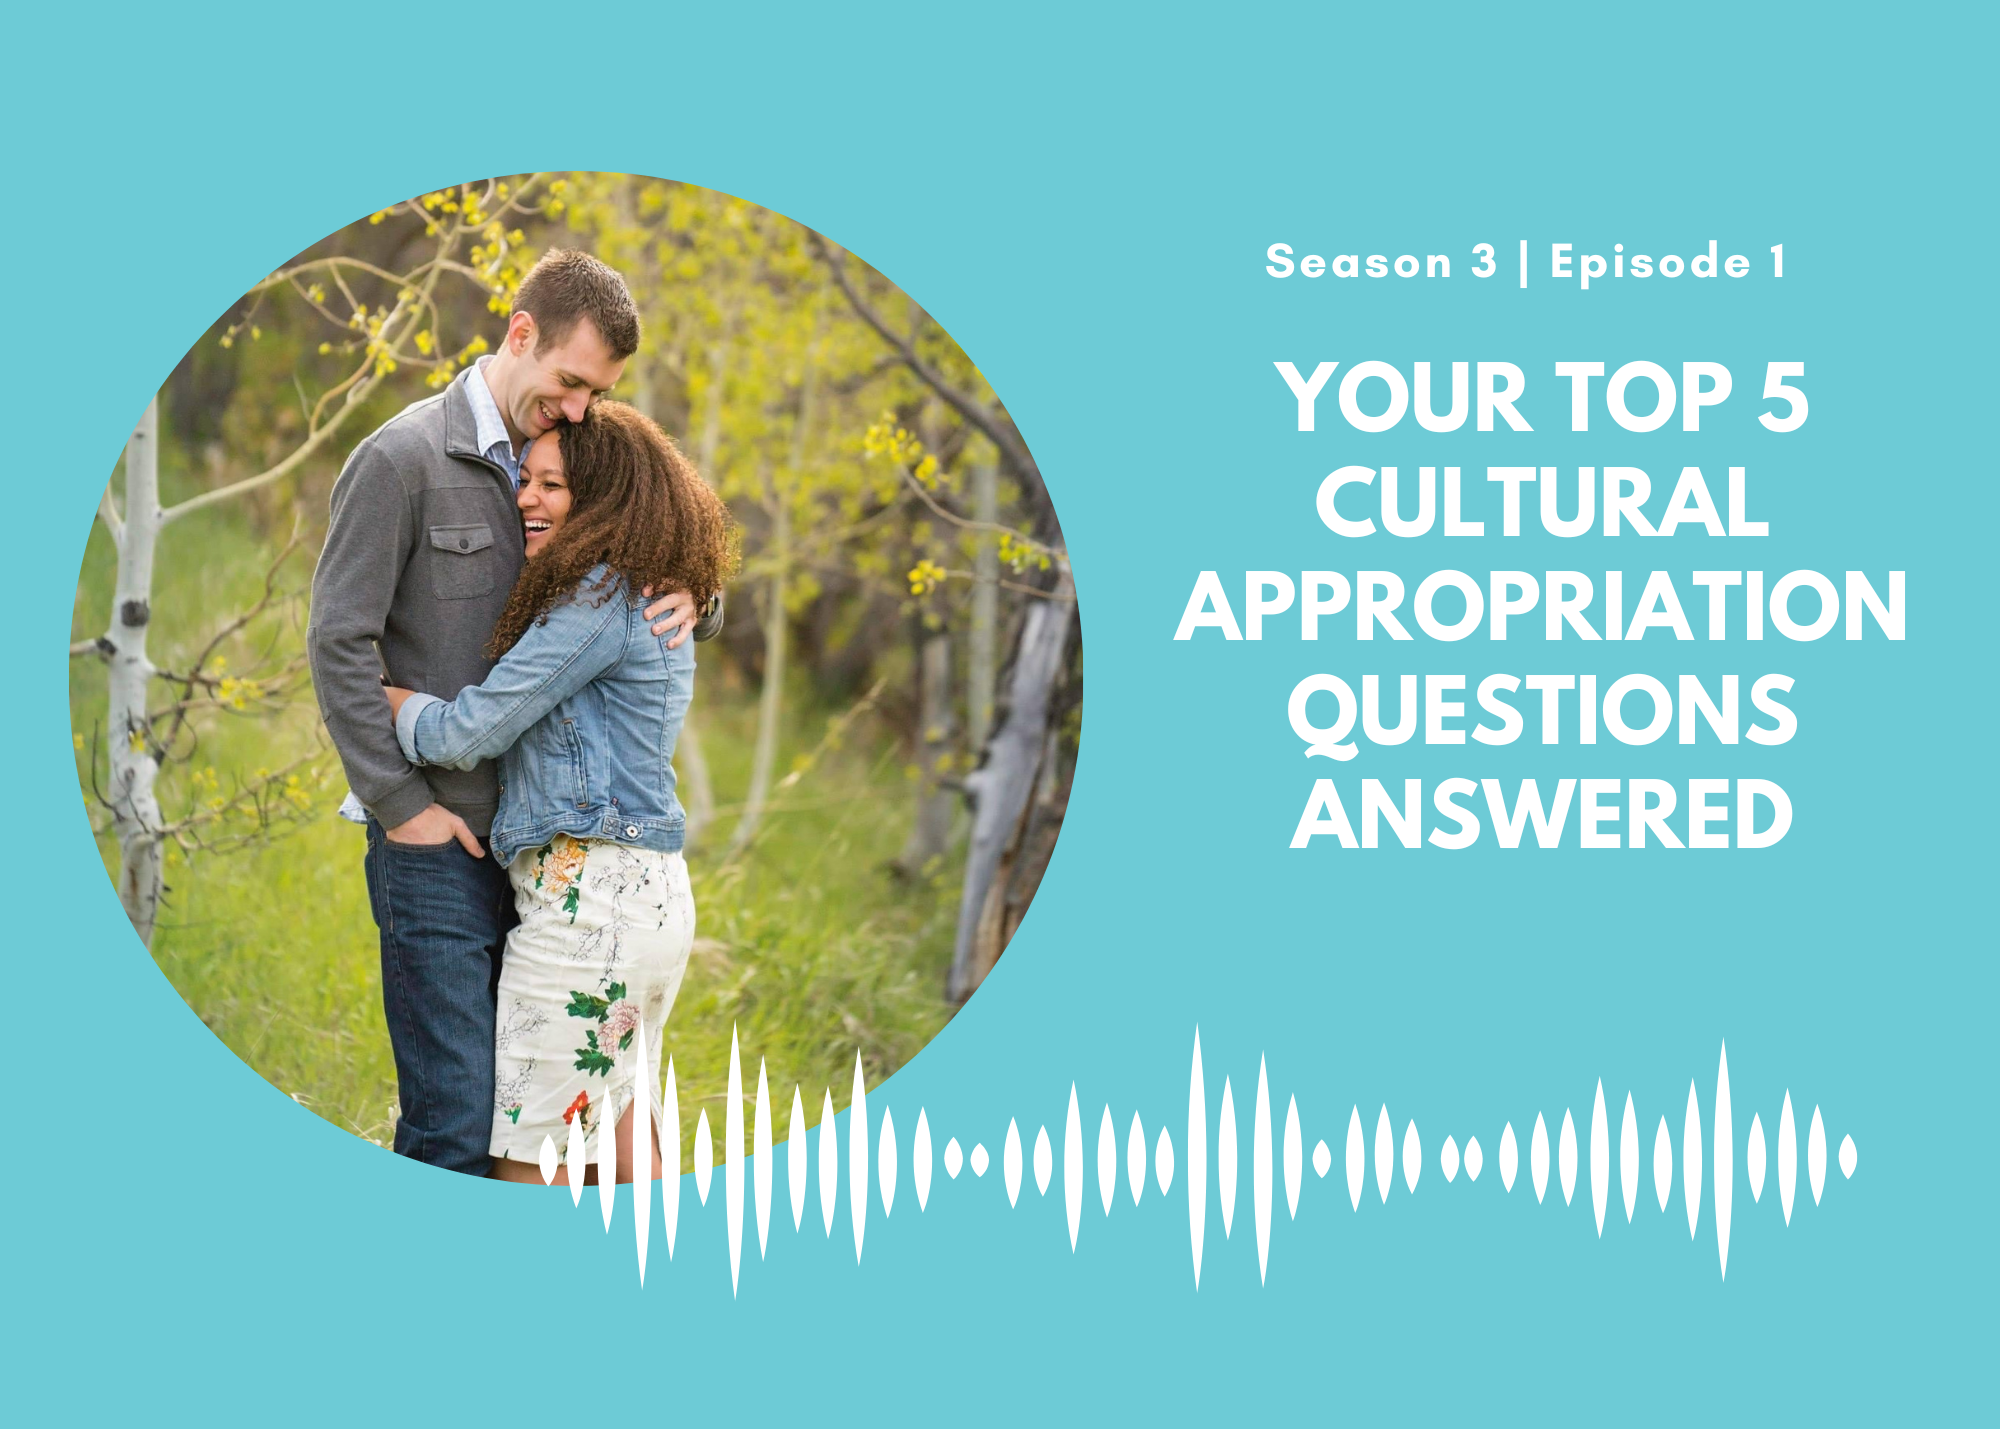 Your Top 5 Cultural Appropriation Questions Answered